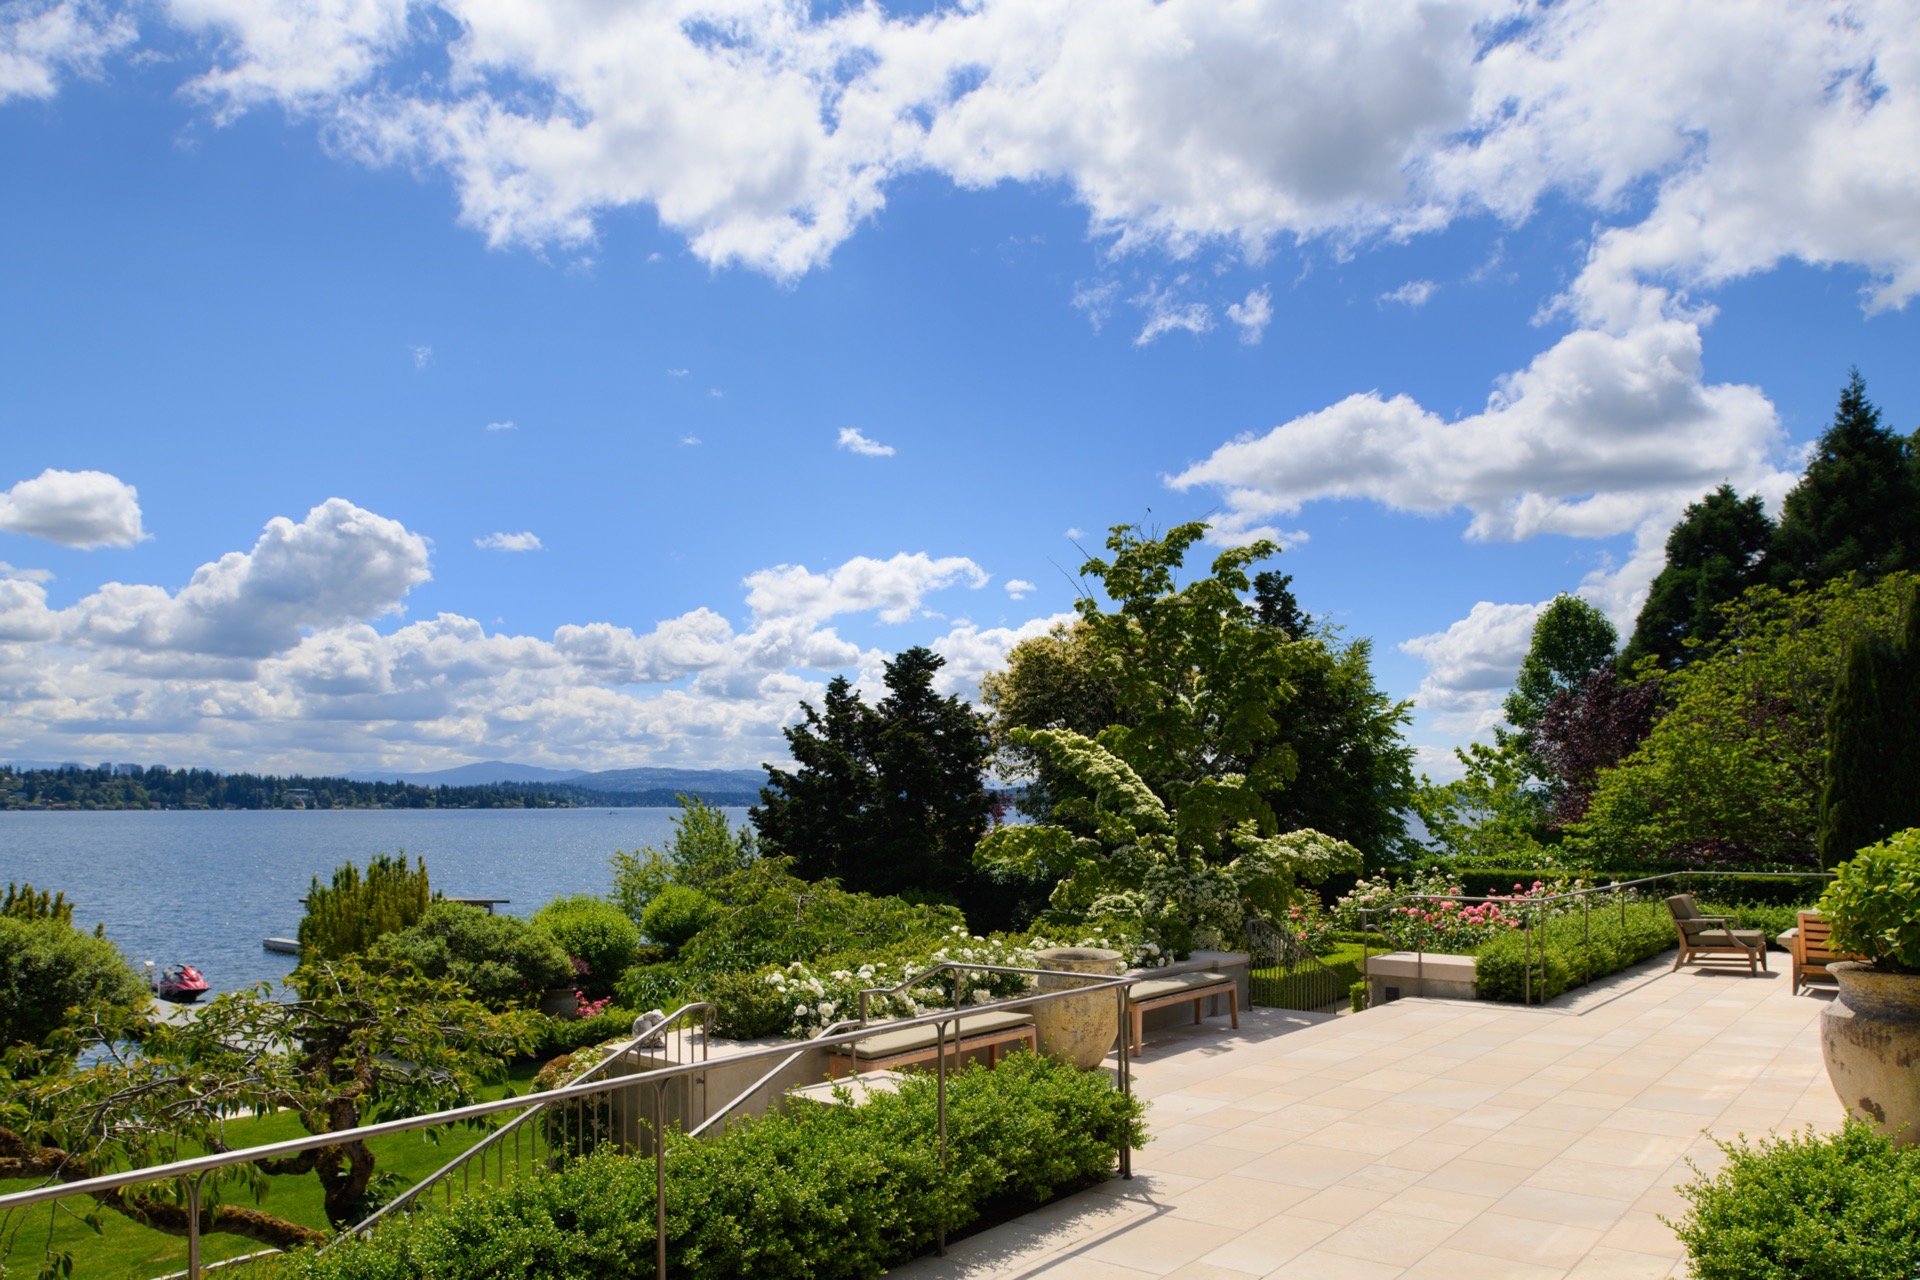 Francis York Waterfront Mansion in Seattle’s Exclusive Enclave, The Reed Estate 14.jpg